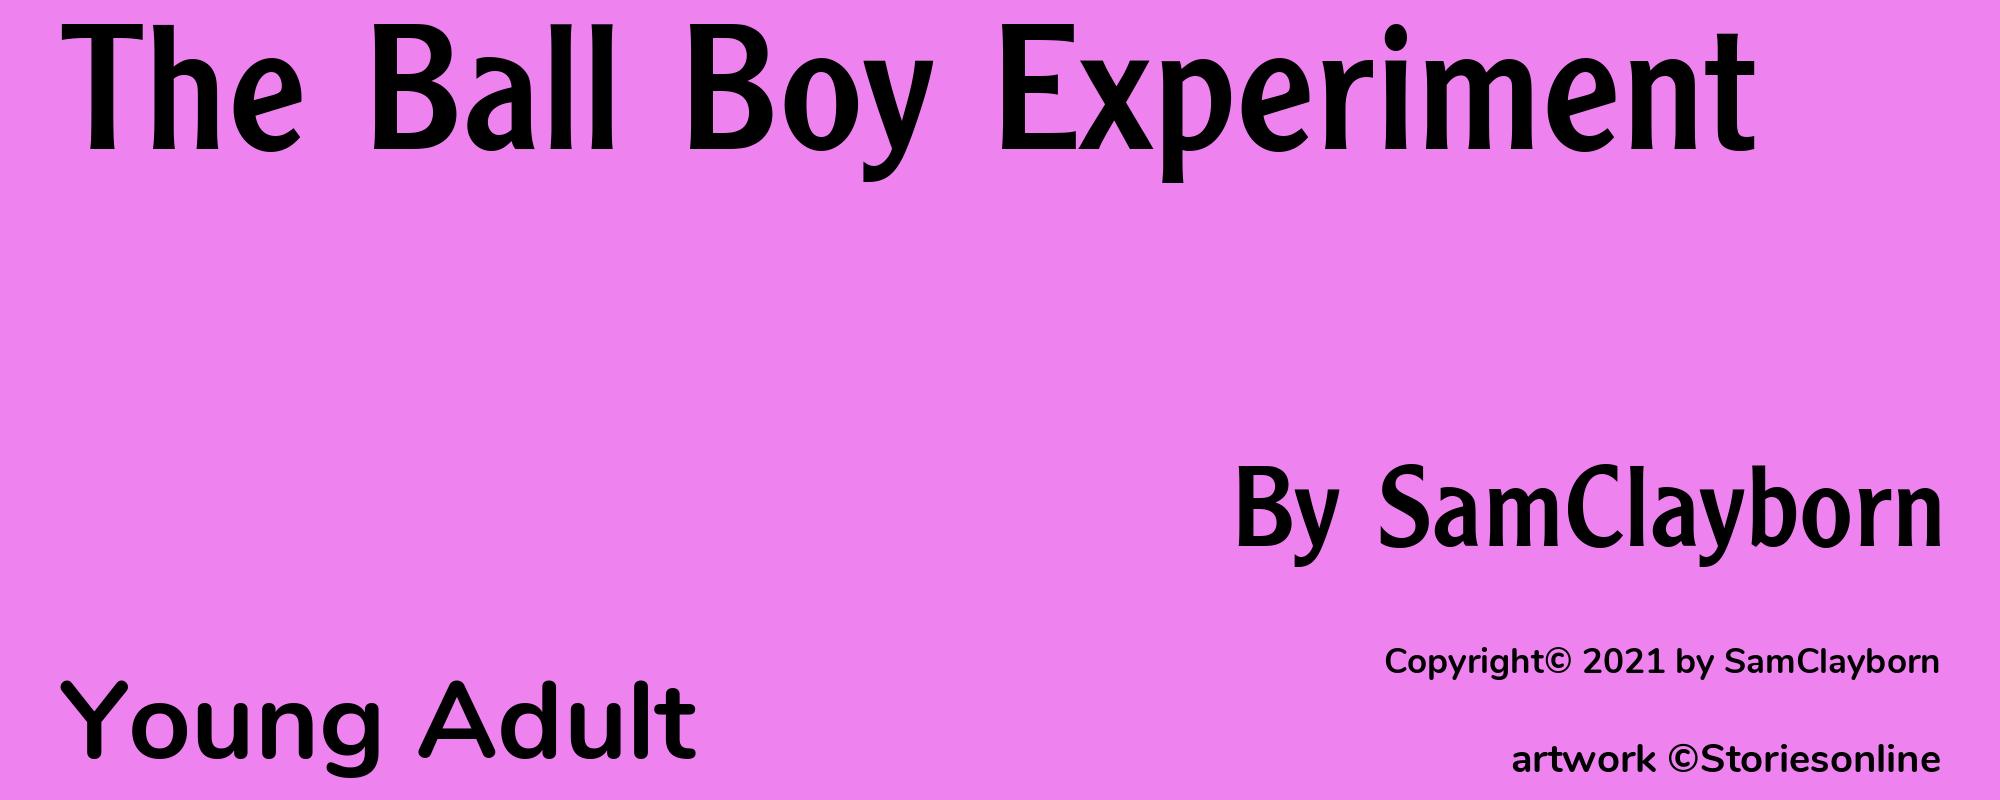 The Ball Boy Experiment - Cover